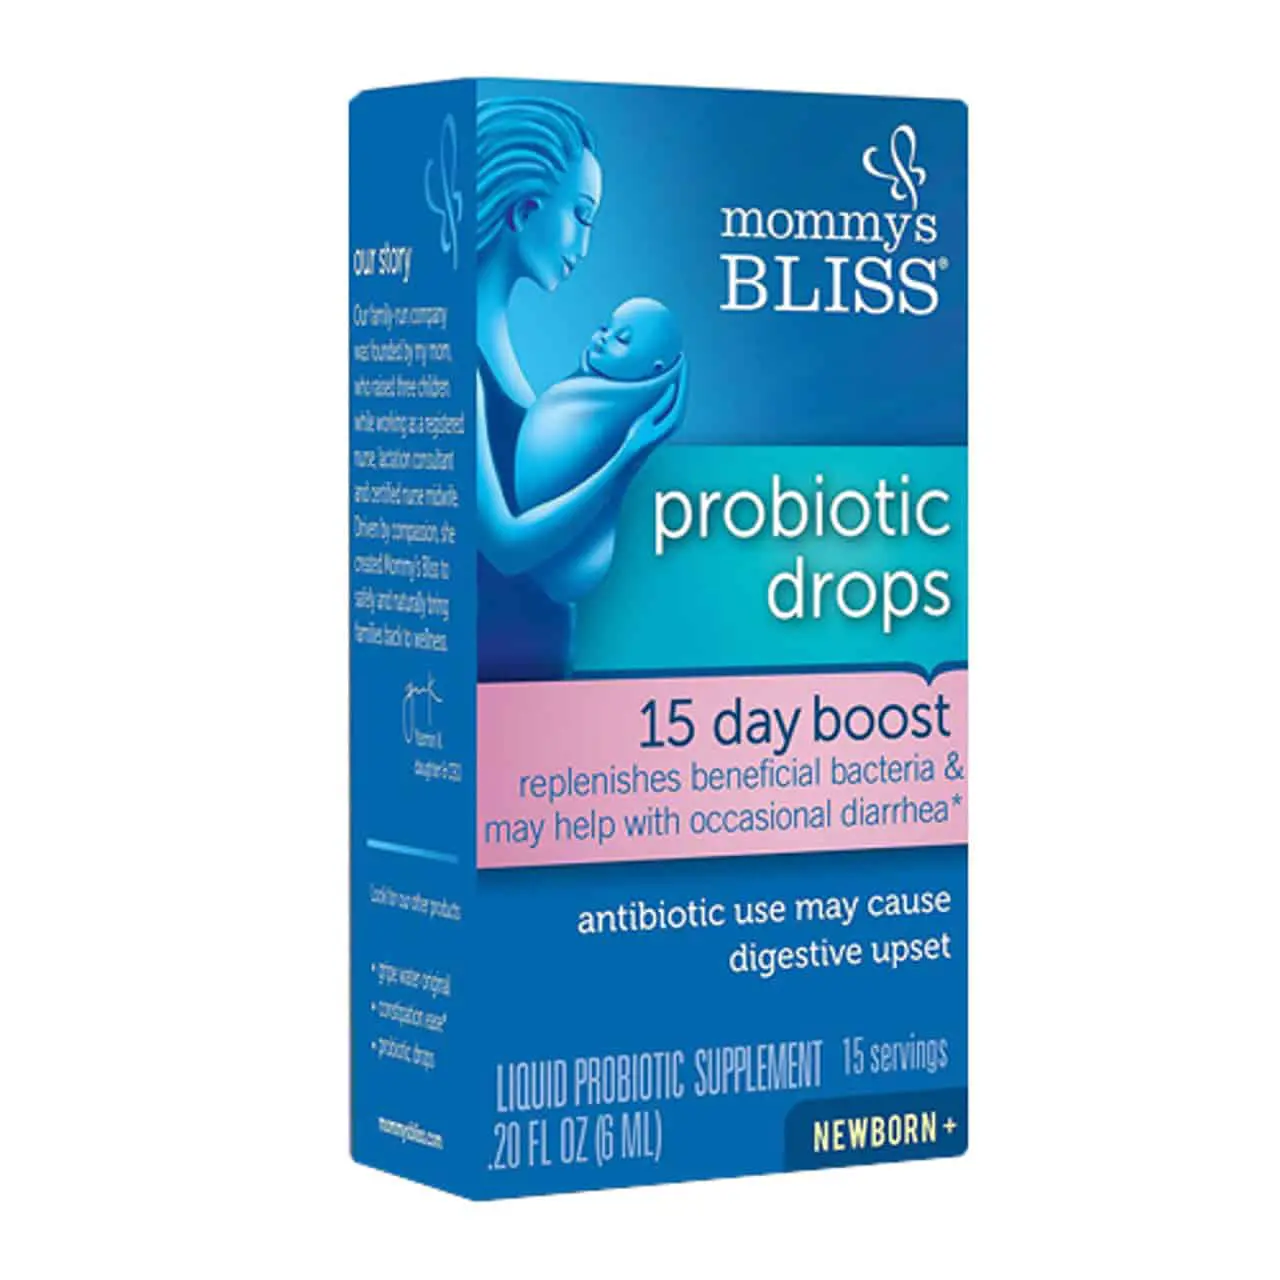 Mommys Bliss Probiotic Drops 15 Day Boost, 0.2 Oz